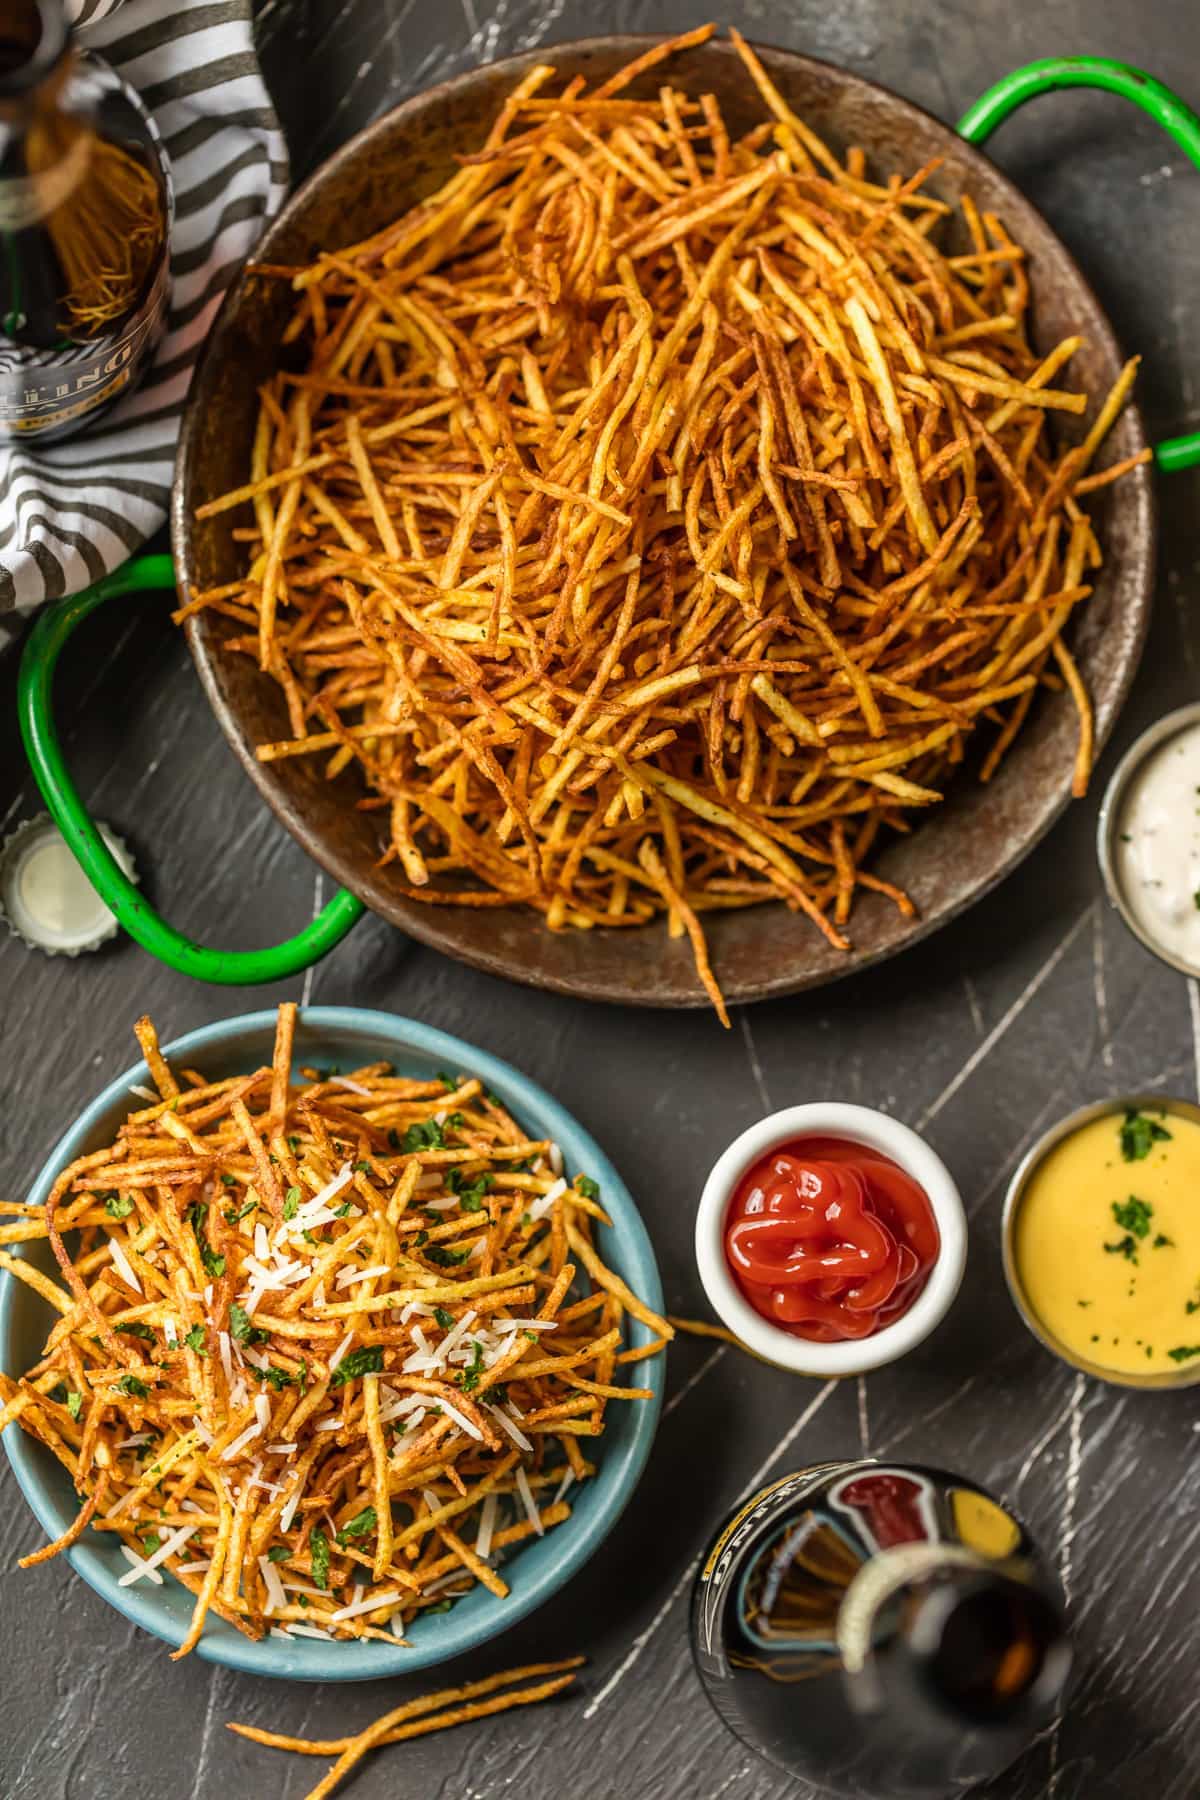 https://www.thecookierookie.com/wp-content/uploads/2017/06/shoestring-fries-3-of-8.jpg